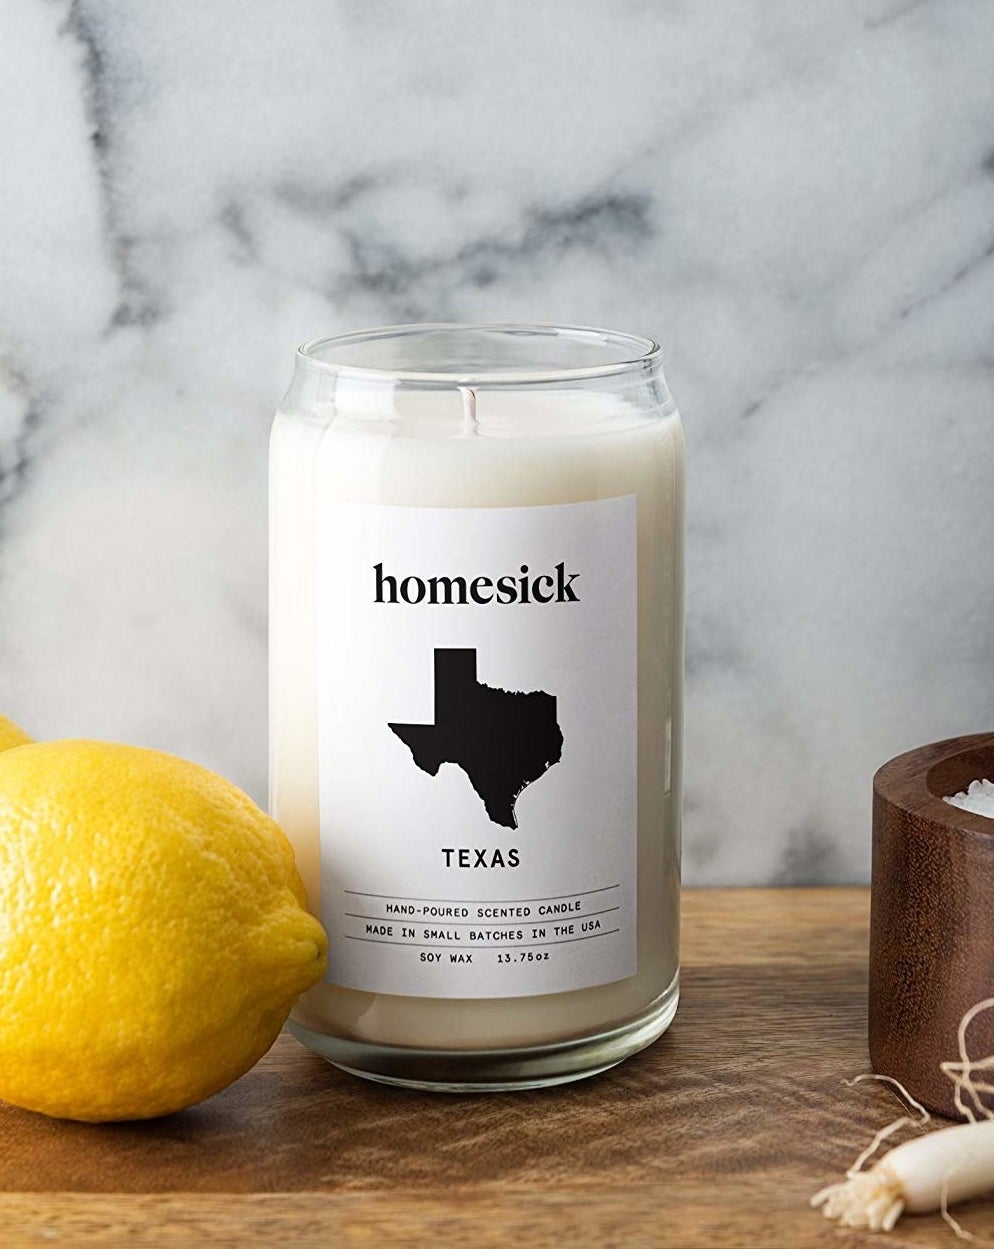 The candle with white wax in a clear cup with a white label that says &quot;Homesick&quot; and Texas with an image of the state